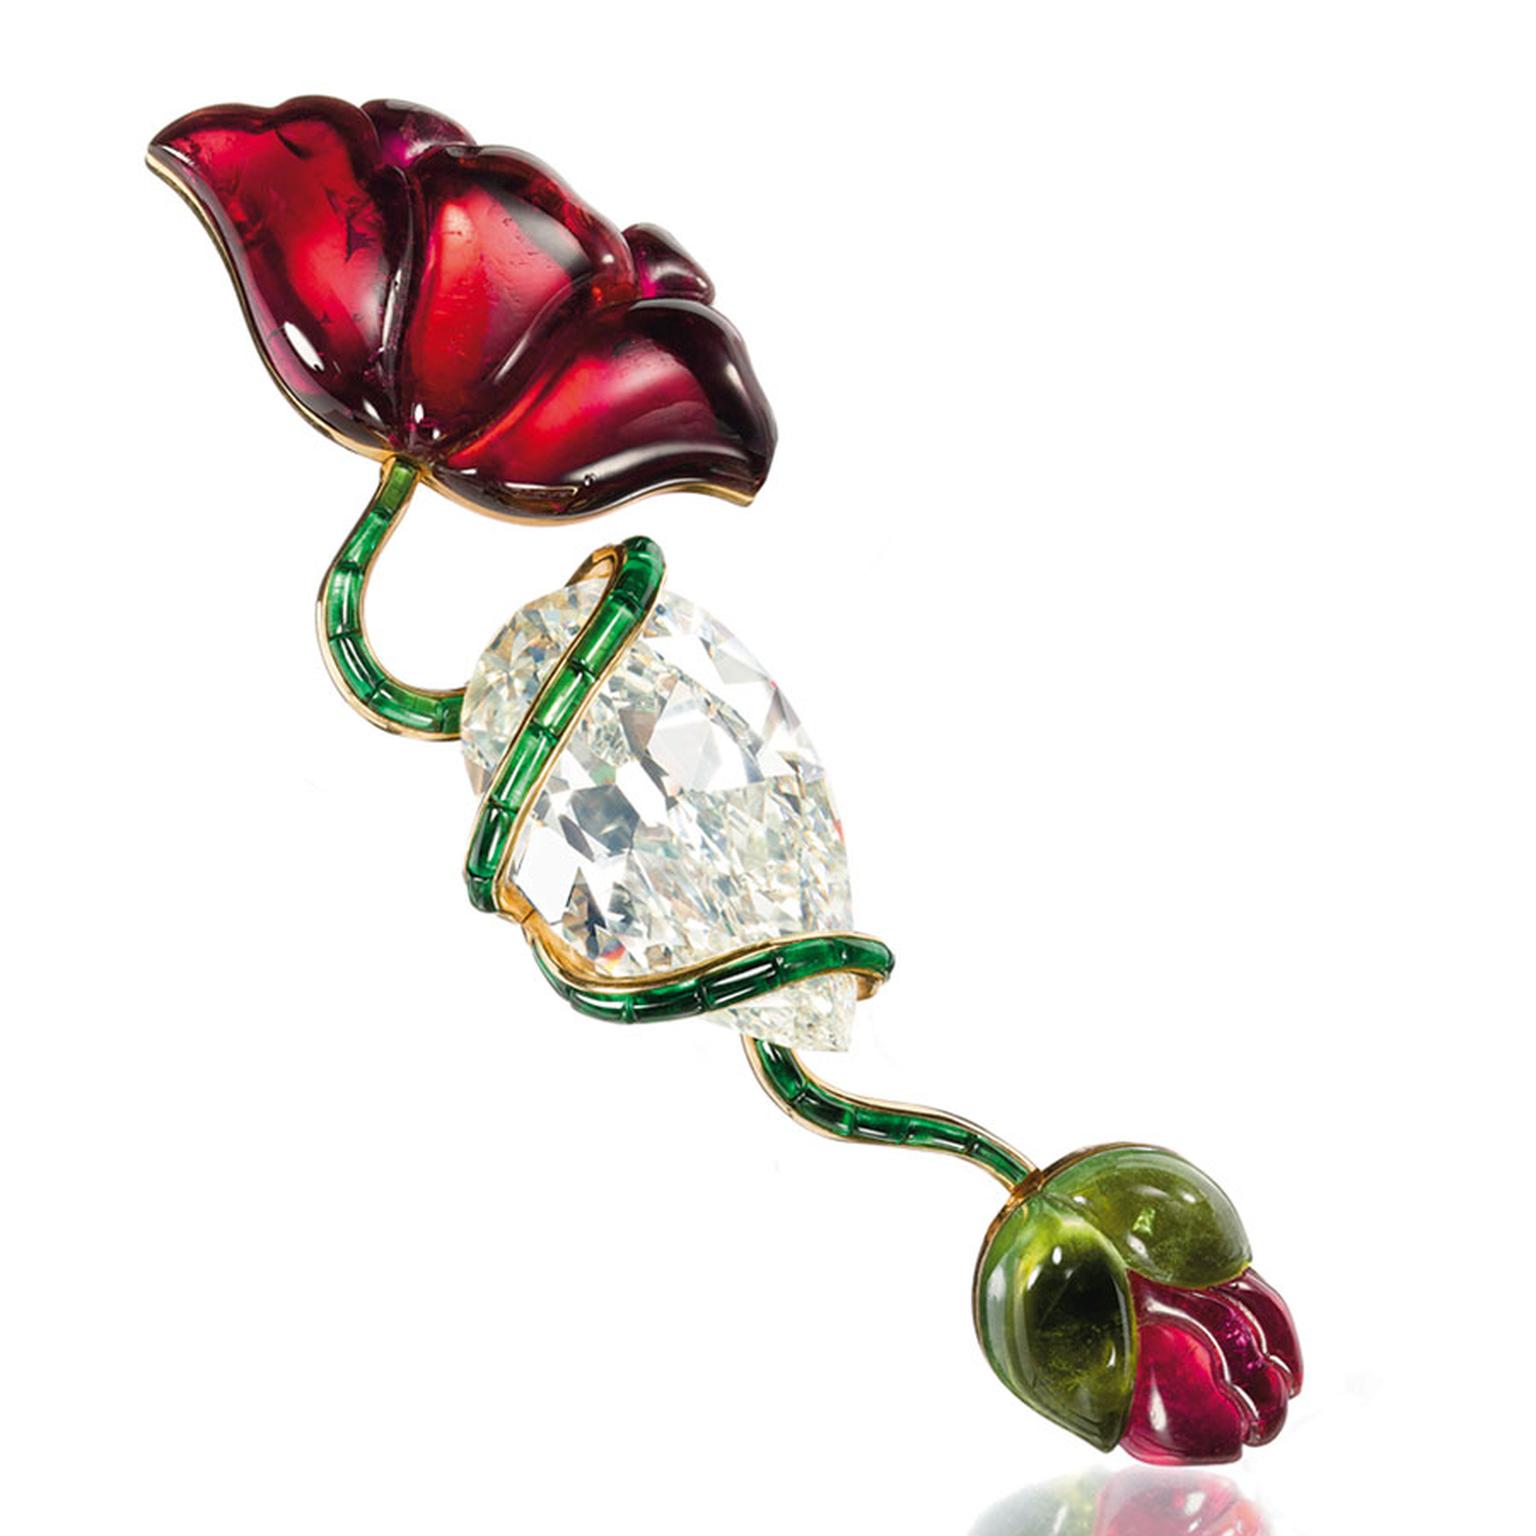 Christies Lily Safra A-diamond,-pink-and-green-tourmaline-Poppy-flower-brooch